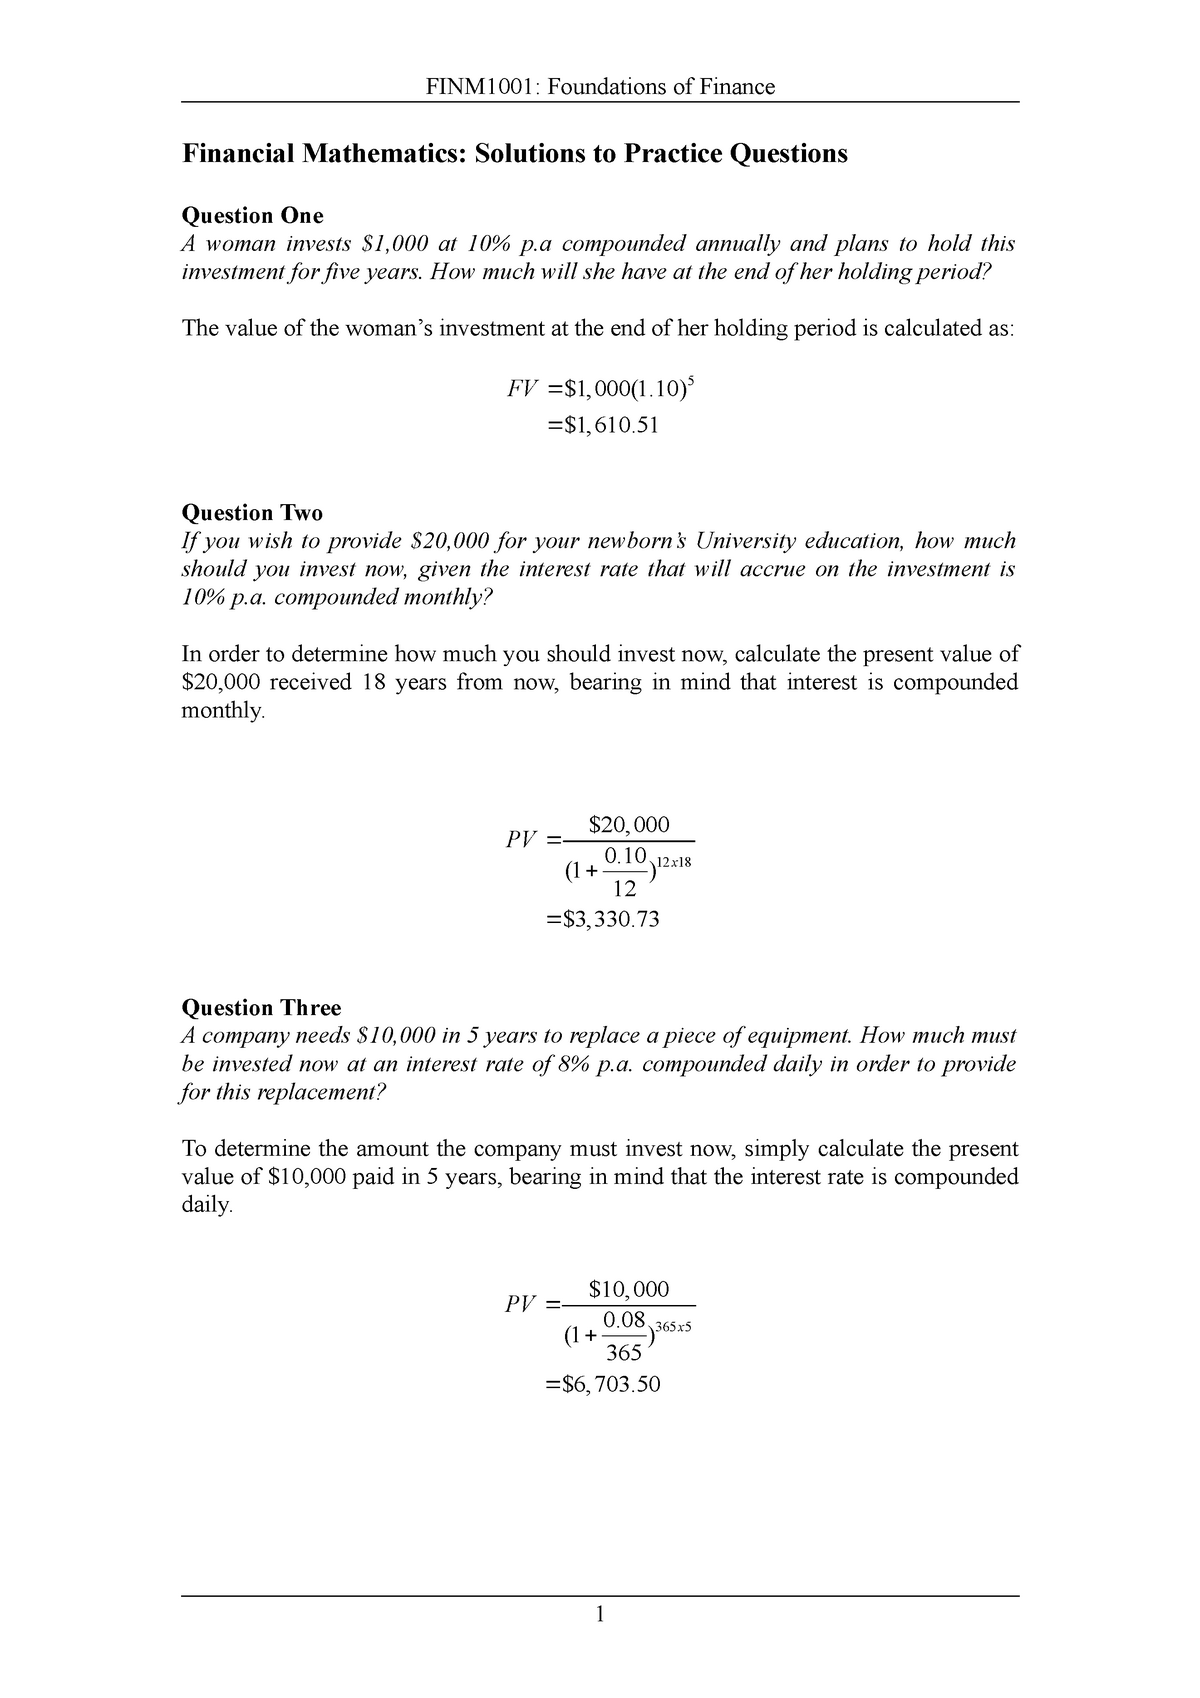 1a-financial-mathematics-solutions-to-practice-questions-finm1001-foundations-of-finance